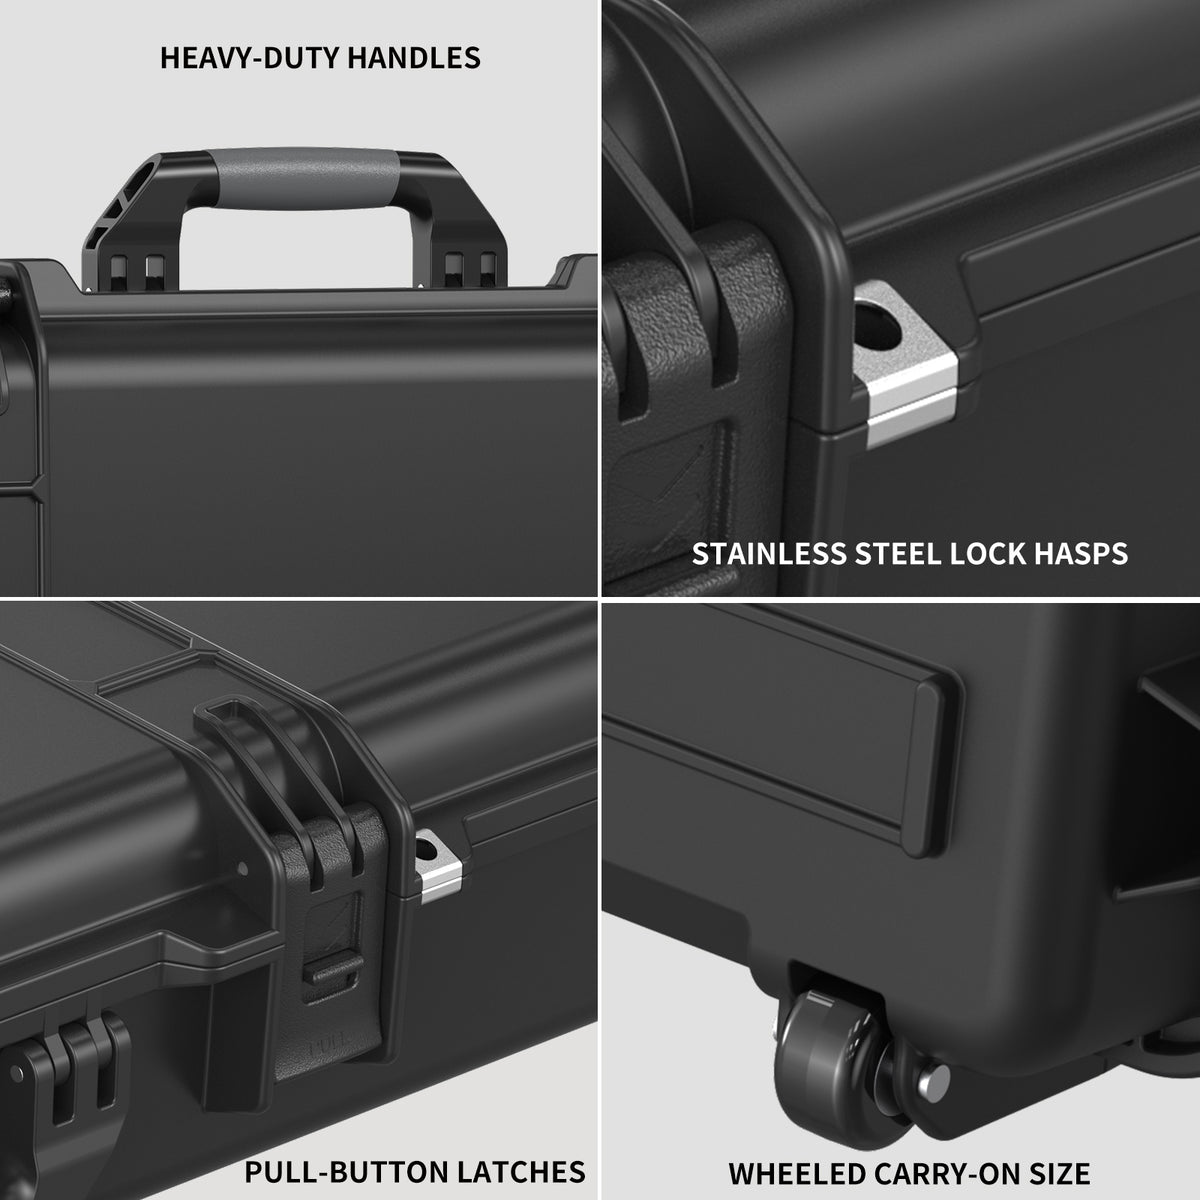 RPNB PP-12150 Weatherproof Hard Rifle Case with Customizable Foam Insert Features